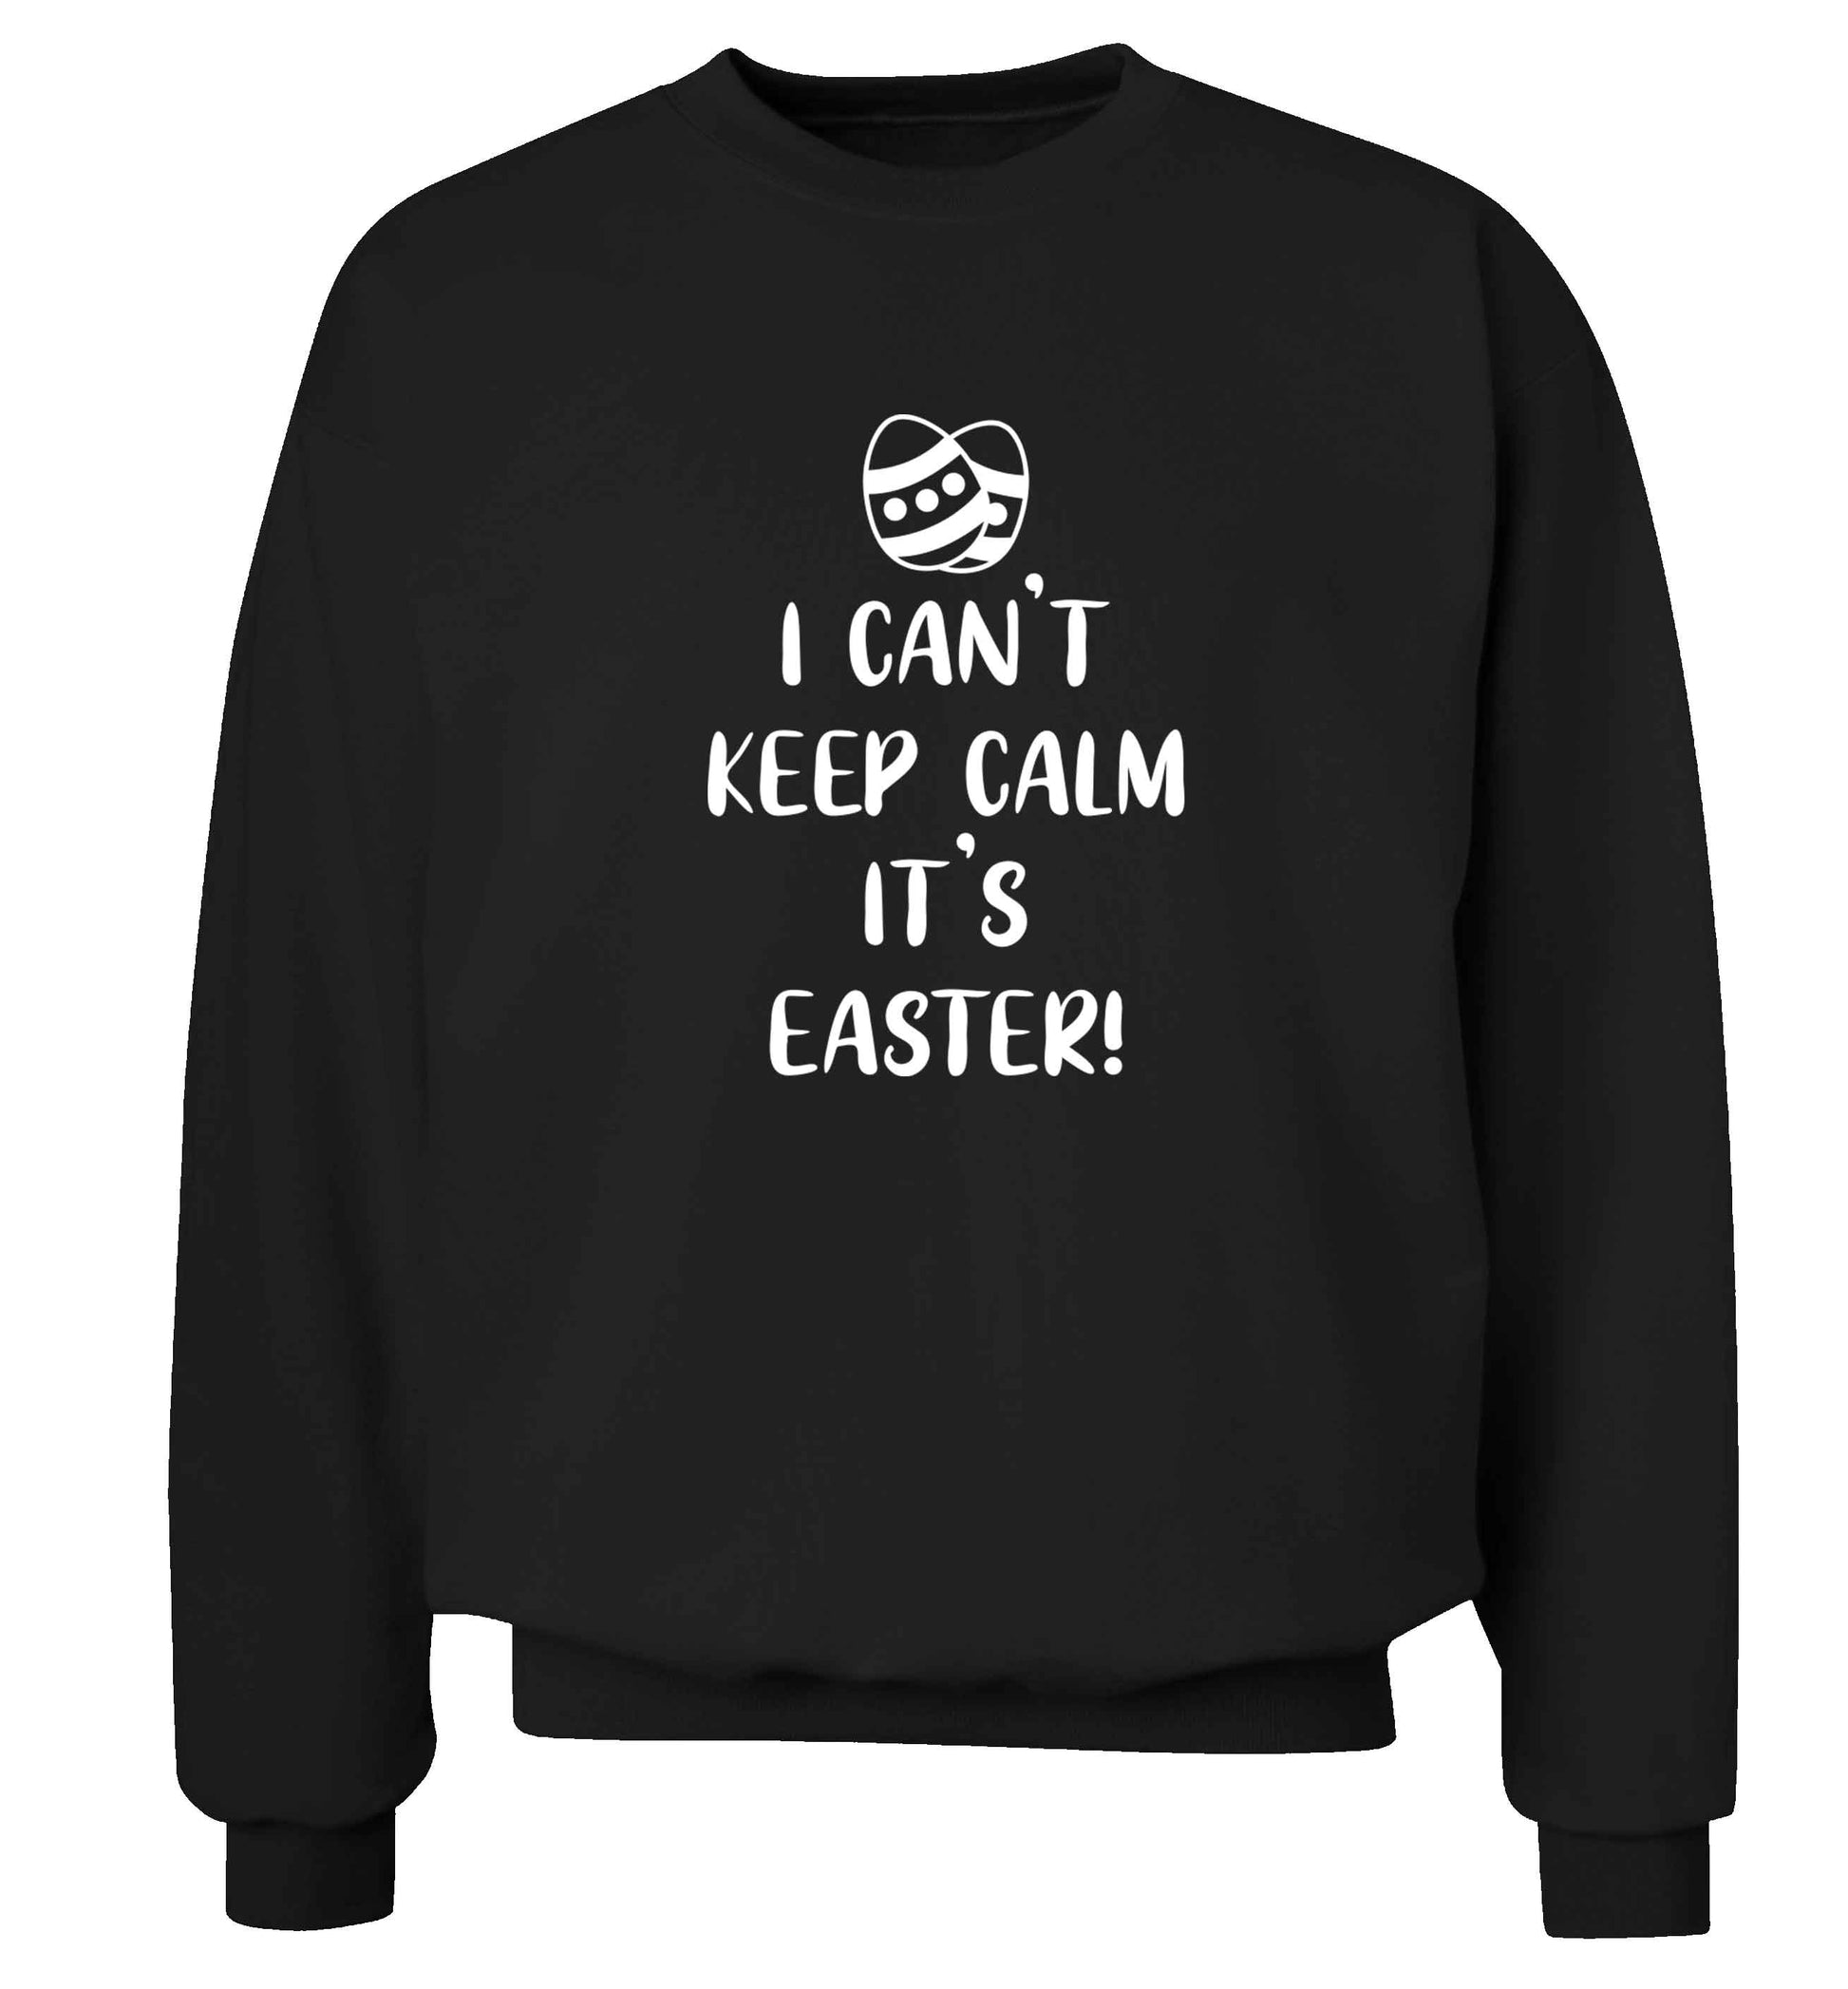 I can't keep calm it's Easter adult's unisex black sweater 2XL